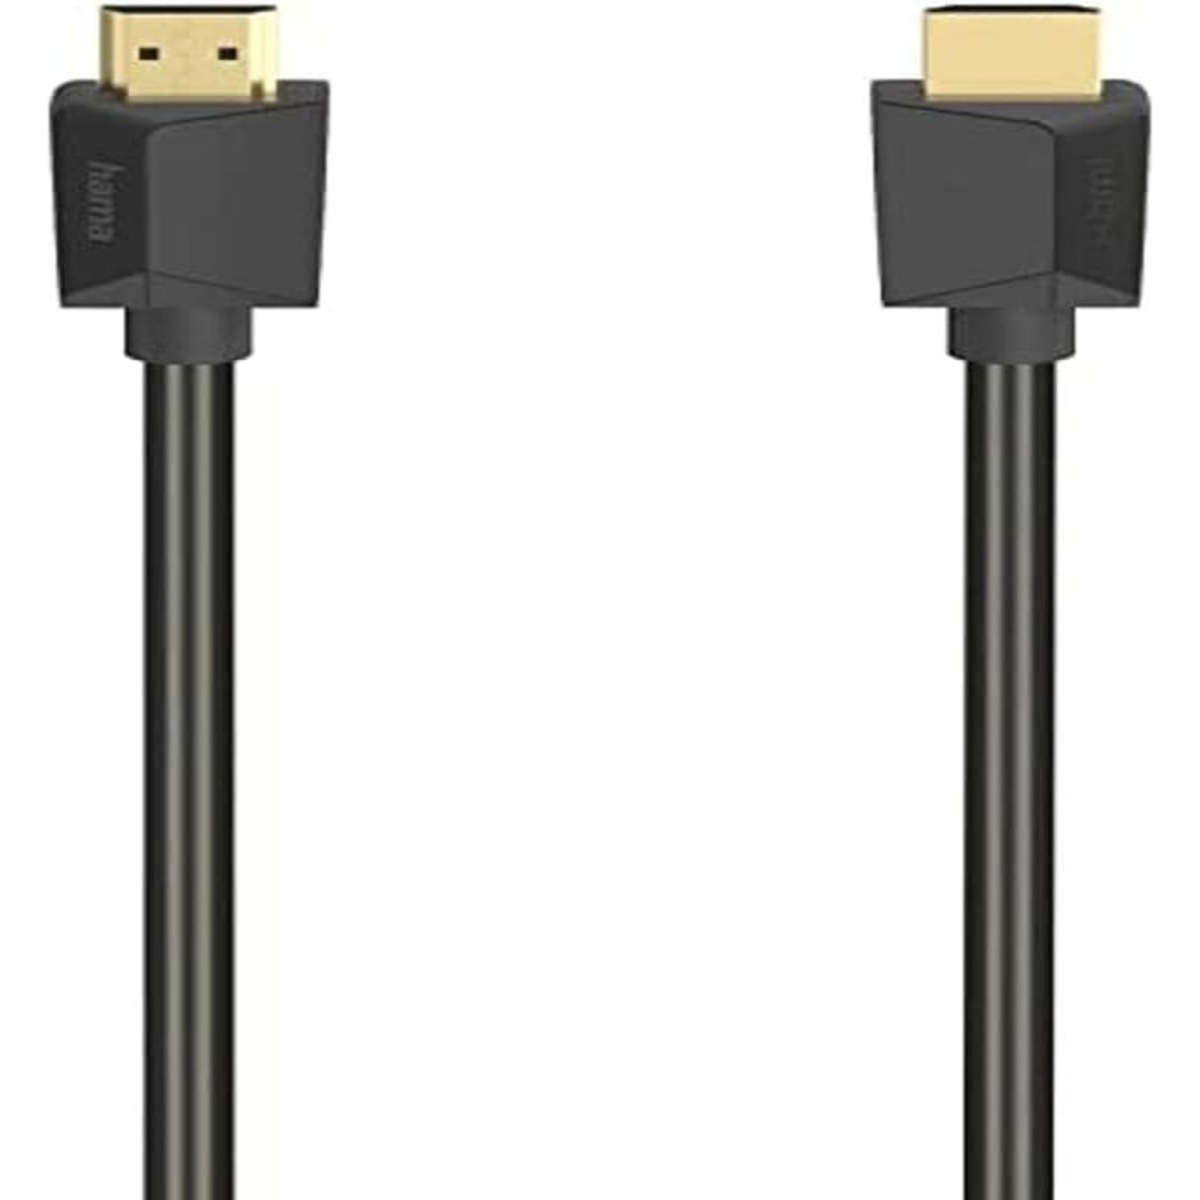 Hama 4K High-Speed HDMI Cable, 5 m, Black